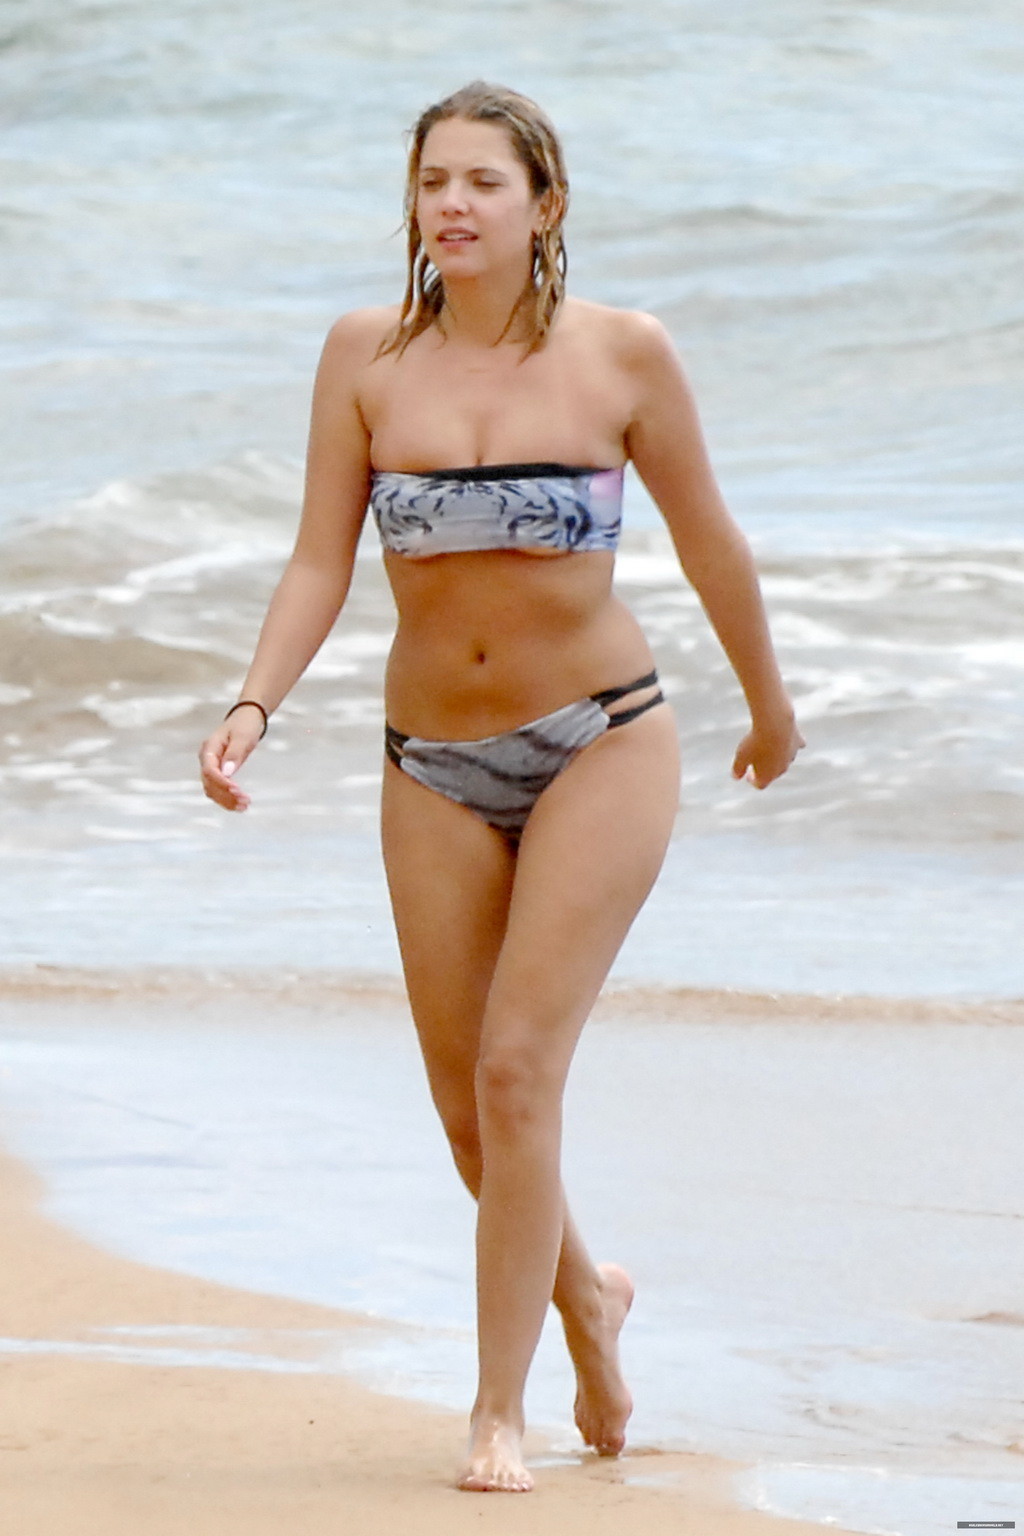 Ashley benson beccata in topless in spiaggia alle hawaii
 #75191381